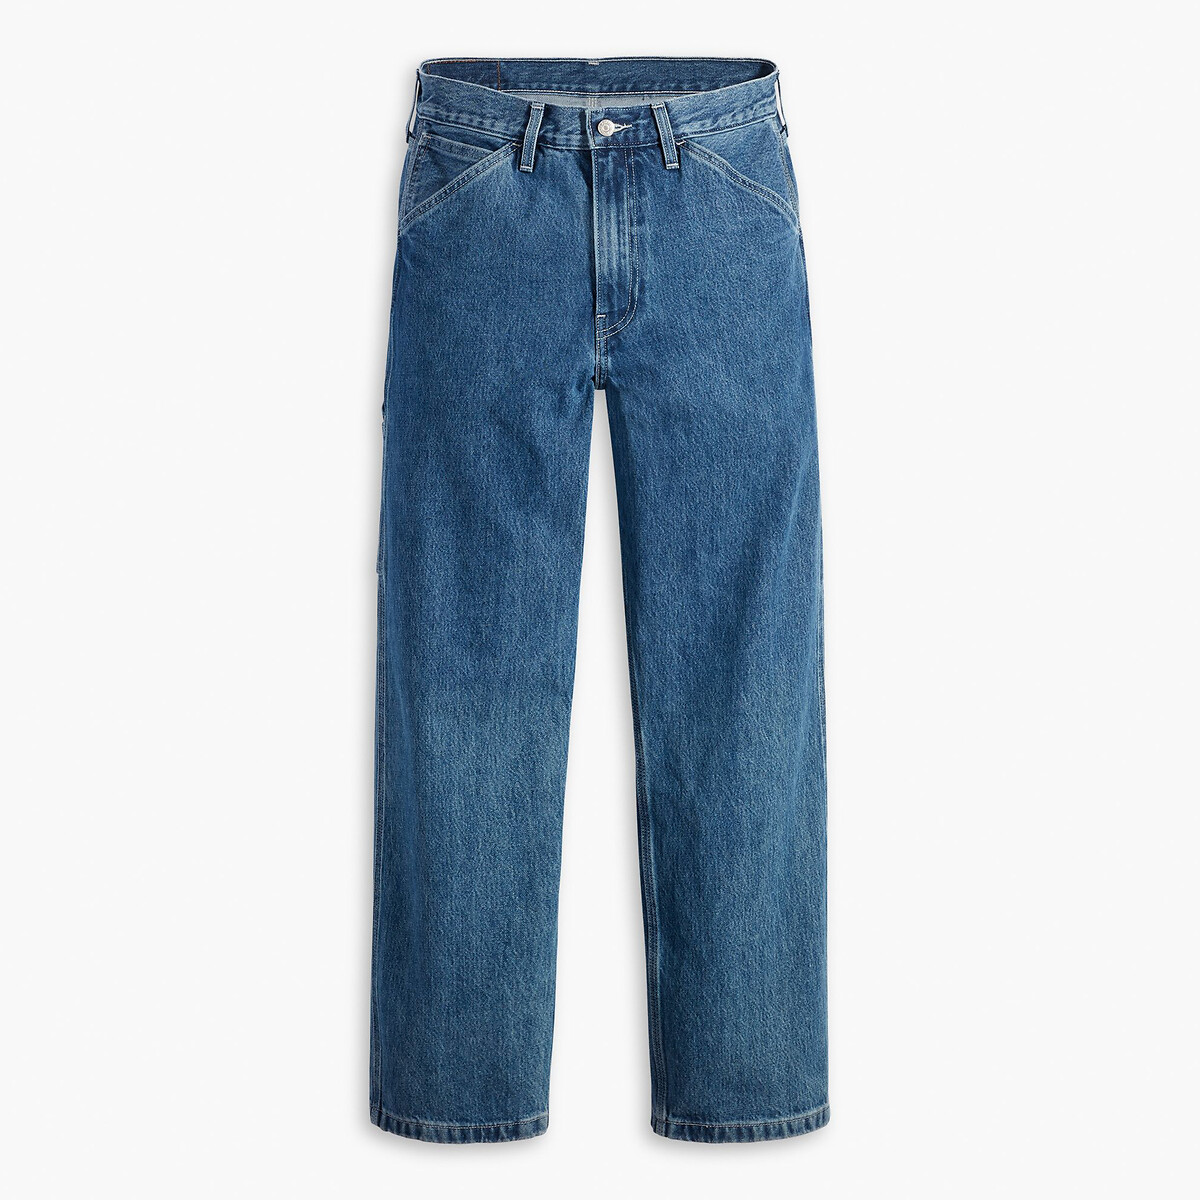 Image of Loose Fit Carpenter Jeans in Mid Rise